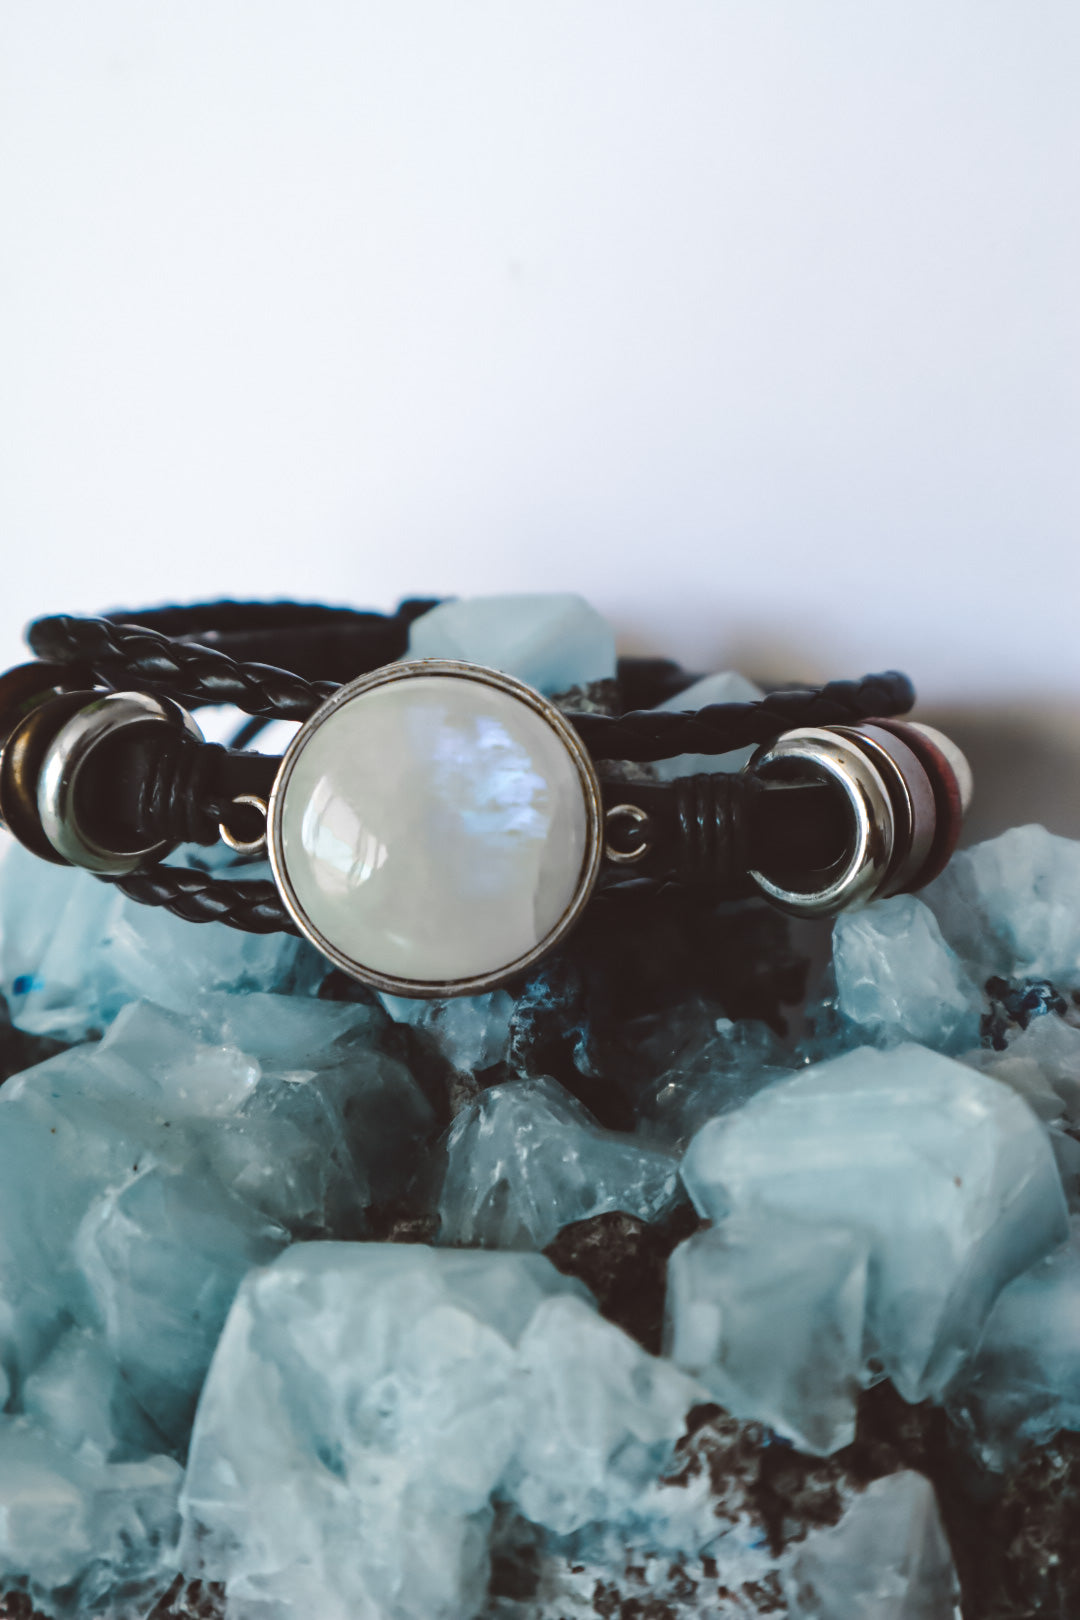 "Boho-inspired Rainbow Moonstone Beaded Stack Bracelet featuring a 20mm AAA-grade moonstone on an adjustable braided bracelet with beads and faux leather."